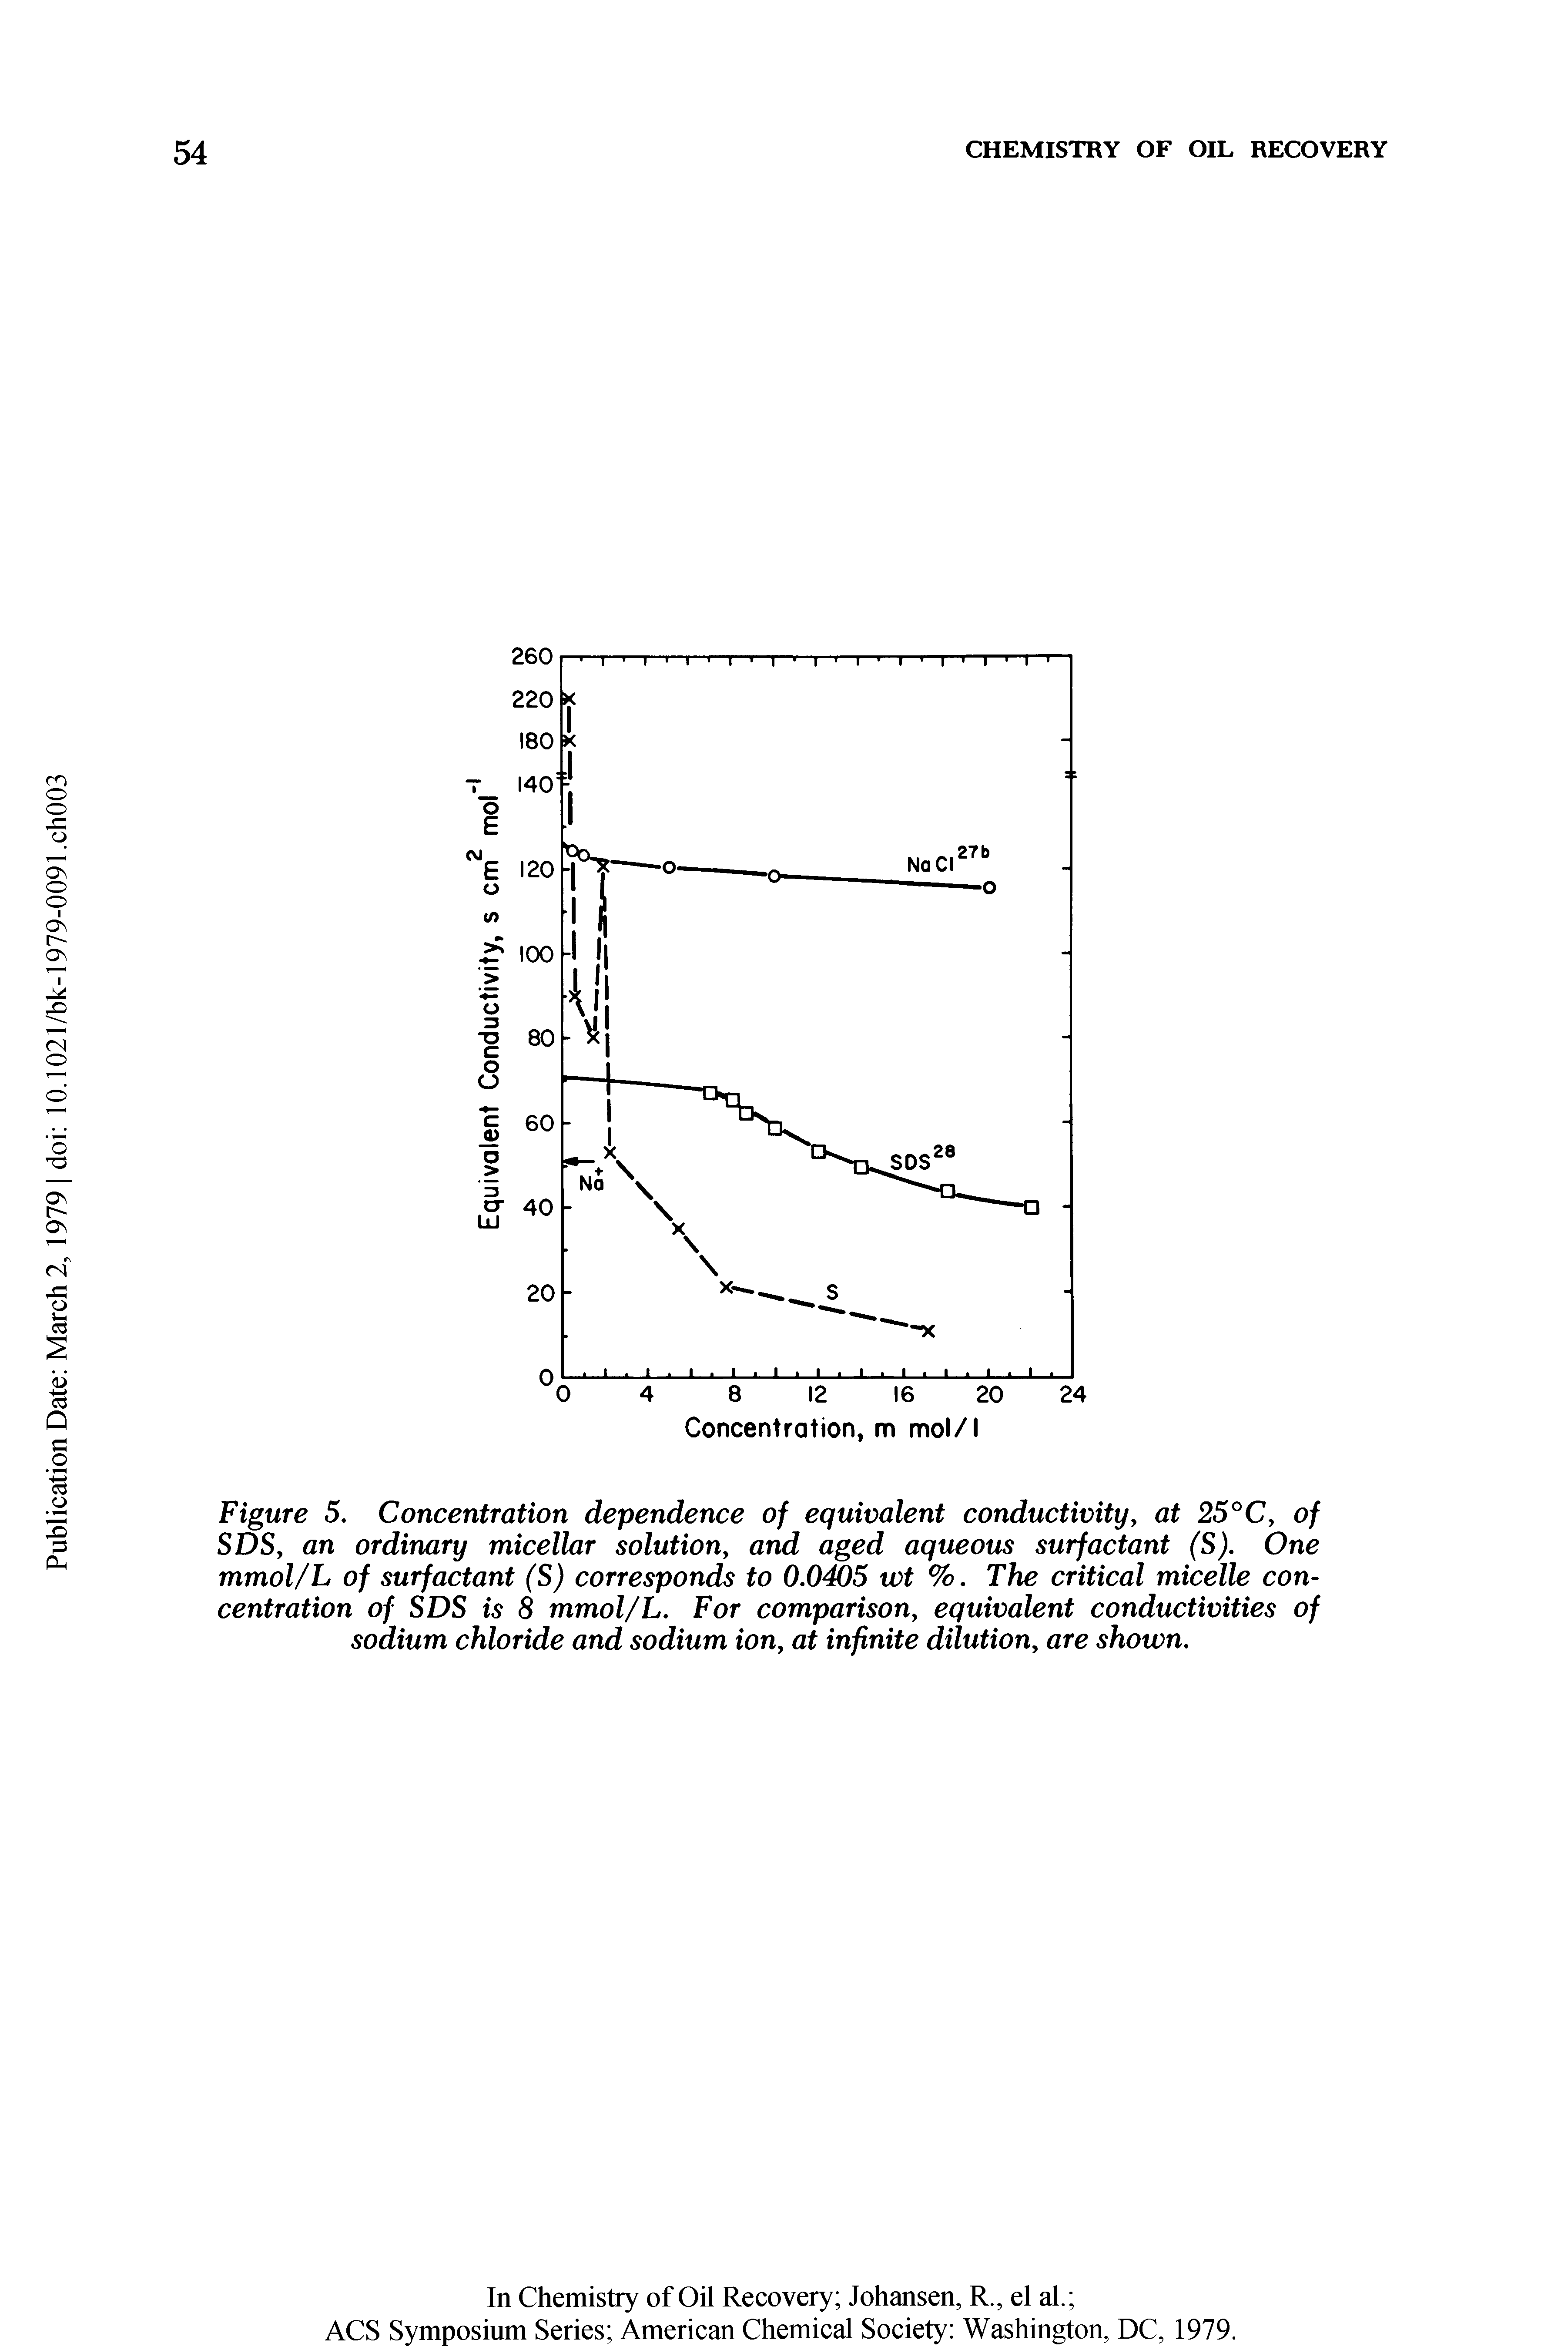 Figure 5. Concentration dependence of equivalent conductivity, at 25°C, of SDS, an ordinary micellar solution, and aged aqueous surfactant (S). One mmol/L of surfactant (S) corresponds to 0.0405 wt %. The critical micelle concentration of SDS is 8 mmol/L. For comparison, equivalent conductivities of sodium chloride and sodium iony at infinite dilution, are shown.